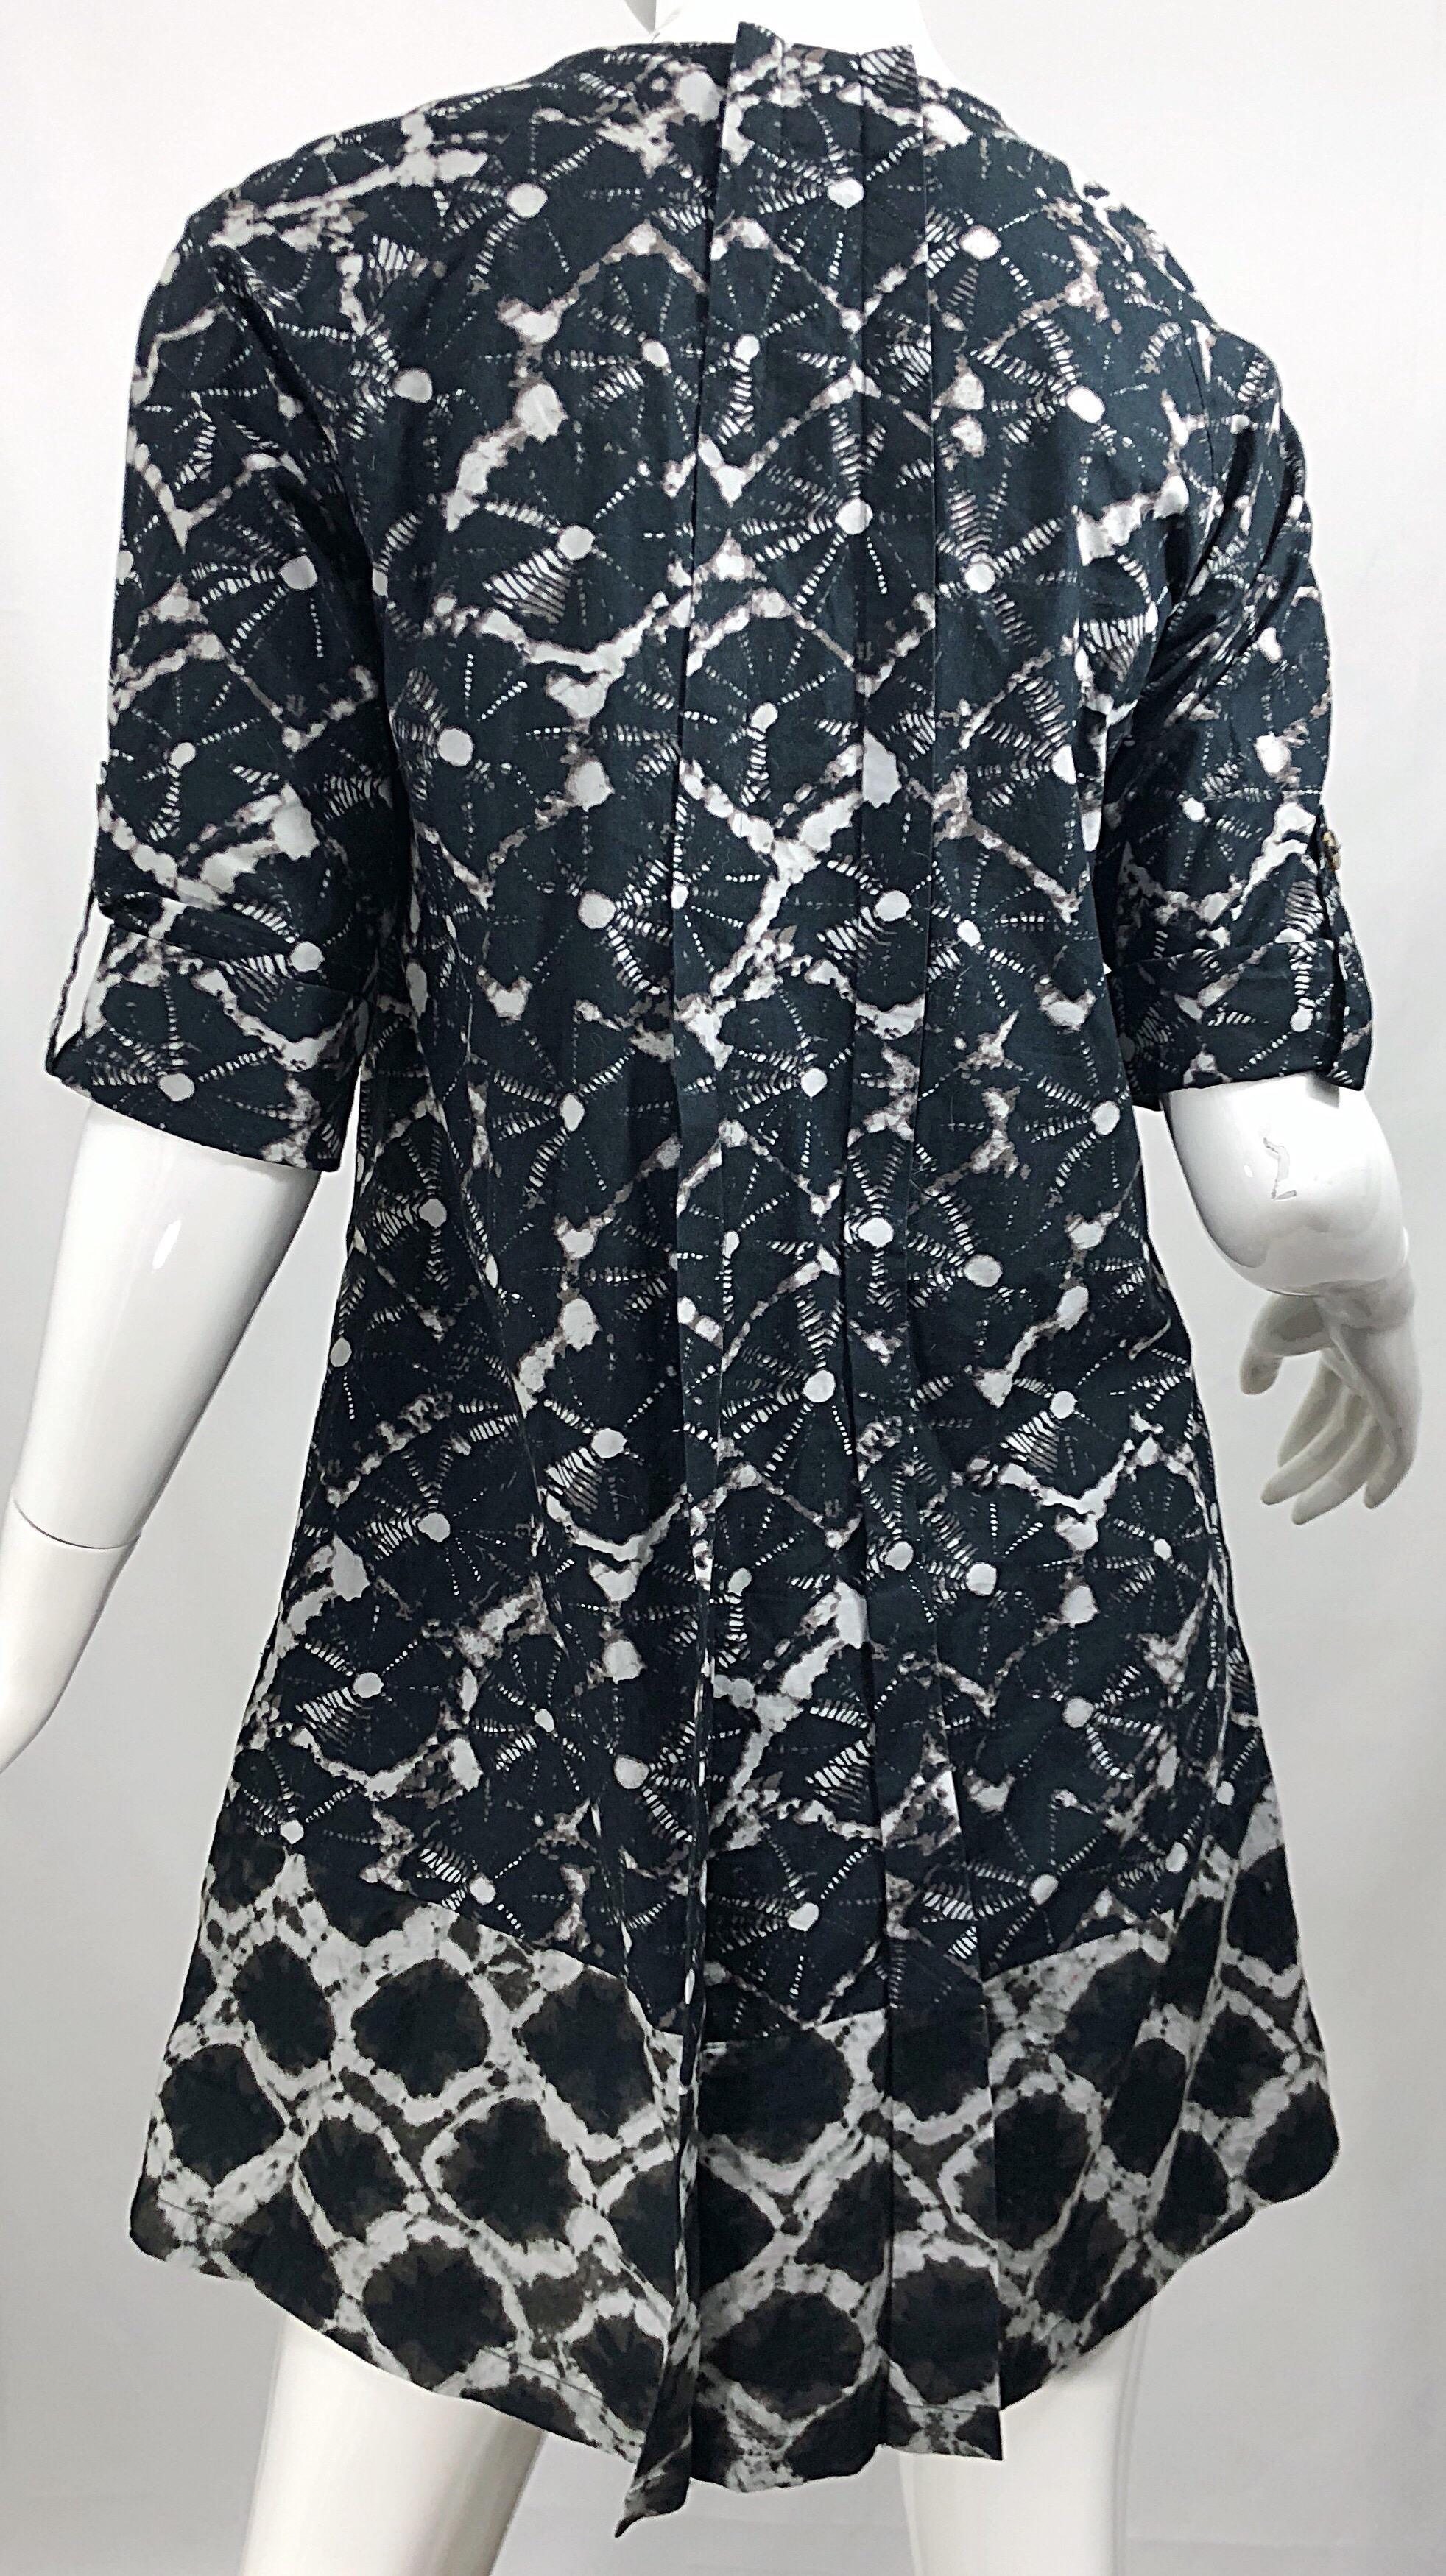 Thakoon Spring 2008 Black White Abstract Tie Dye Trapeze Swing Dress Jacket For Sale 6